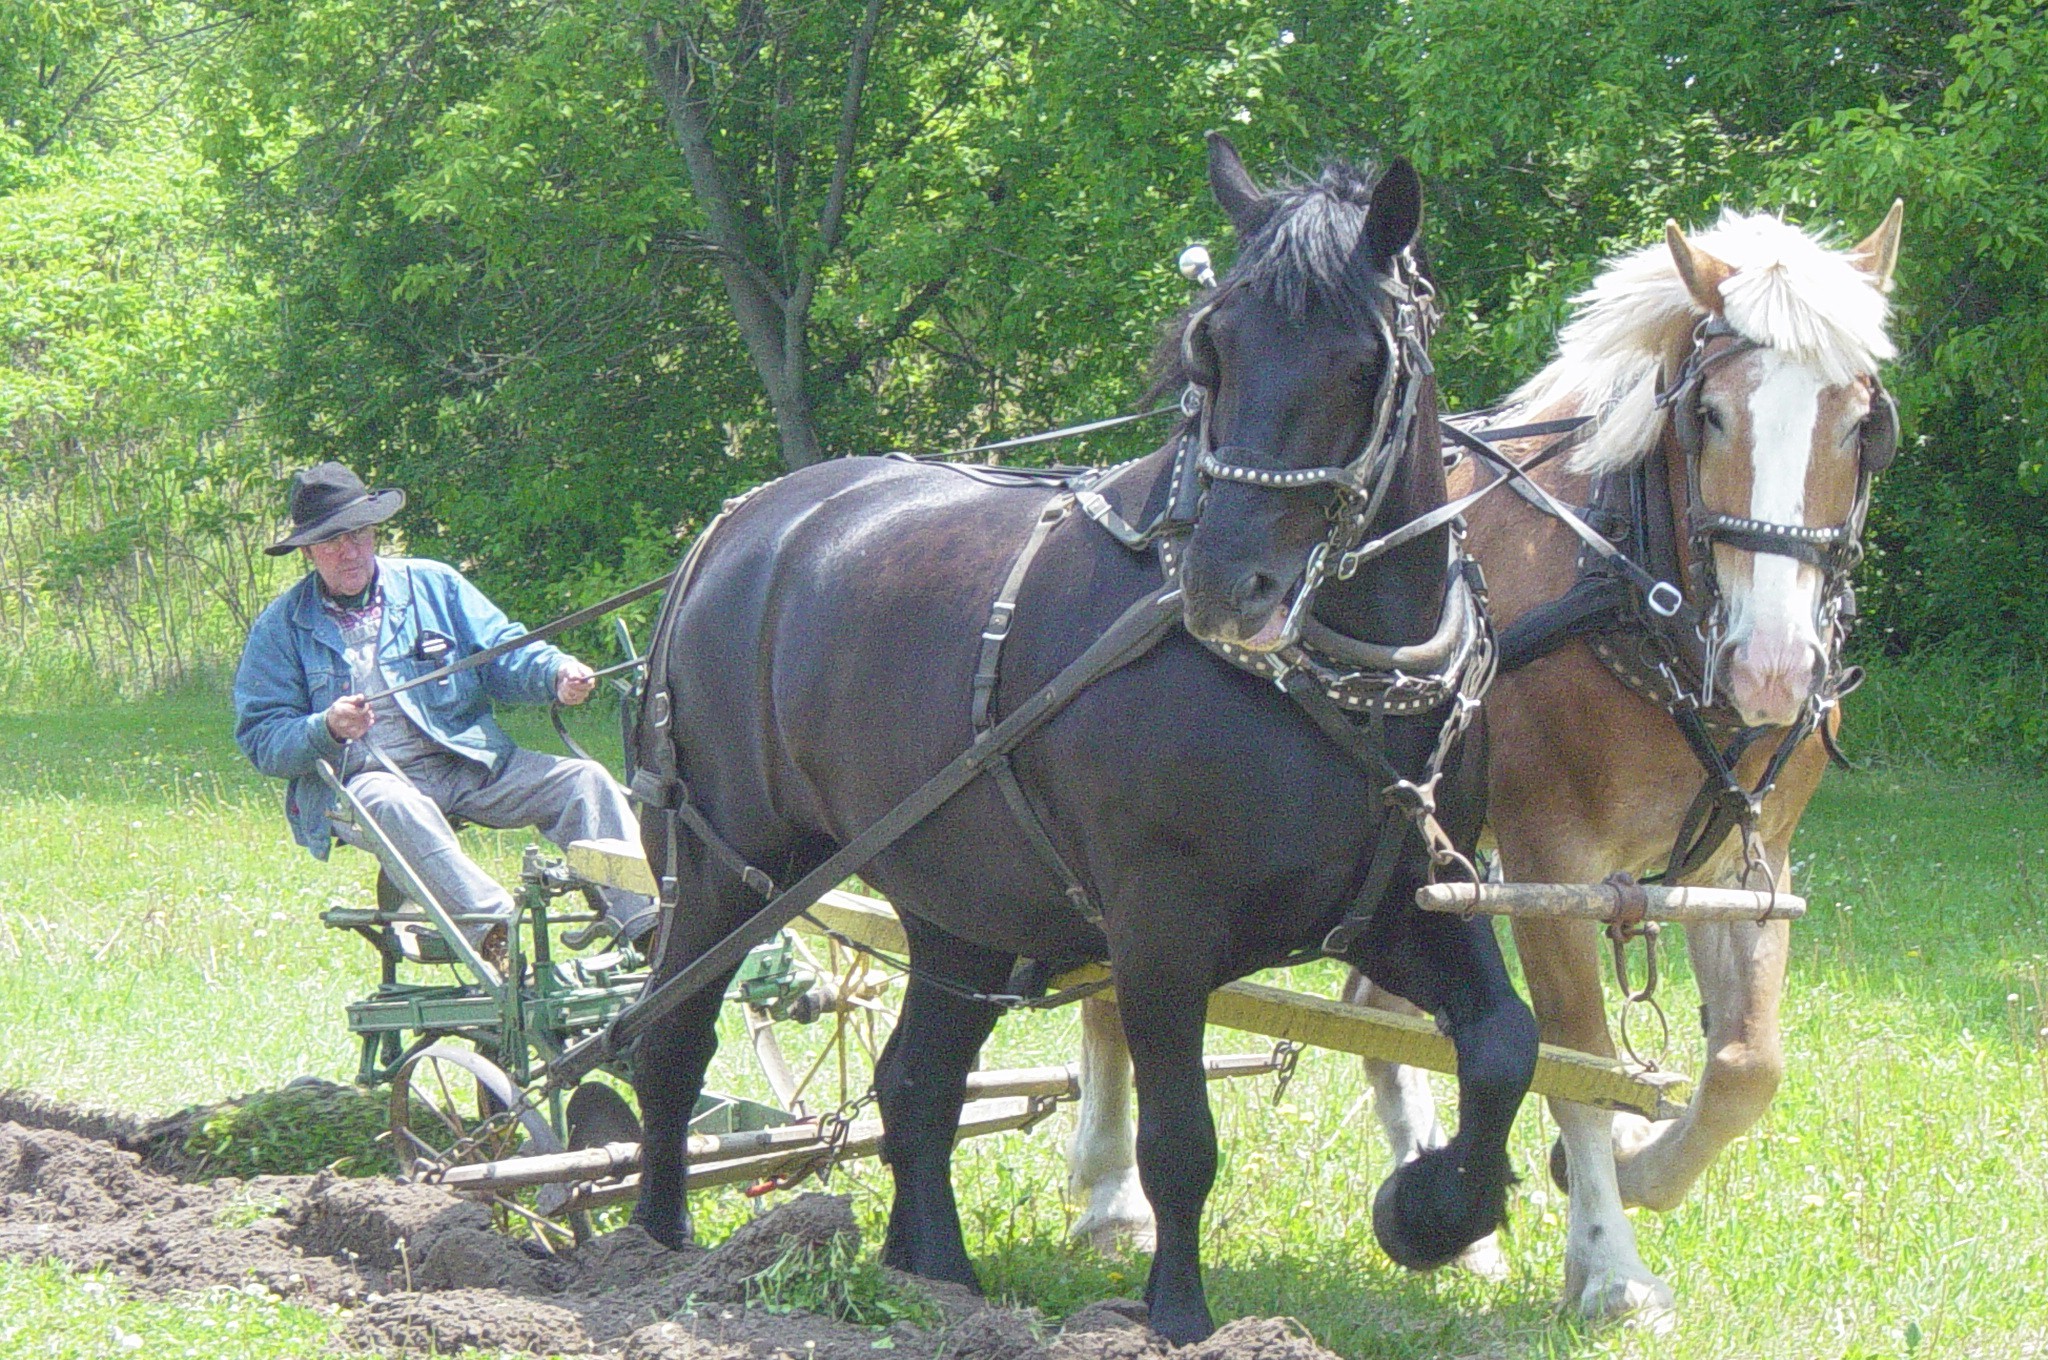 Plowing 19th century style